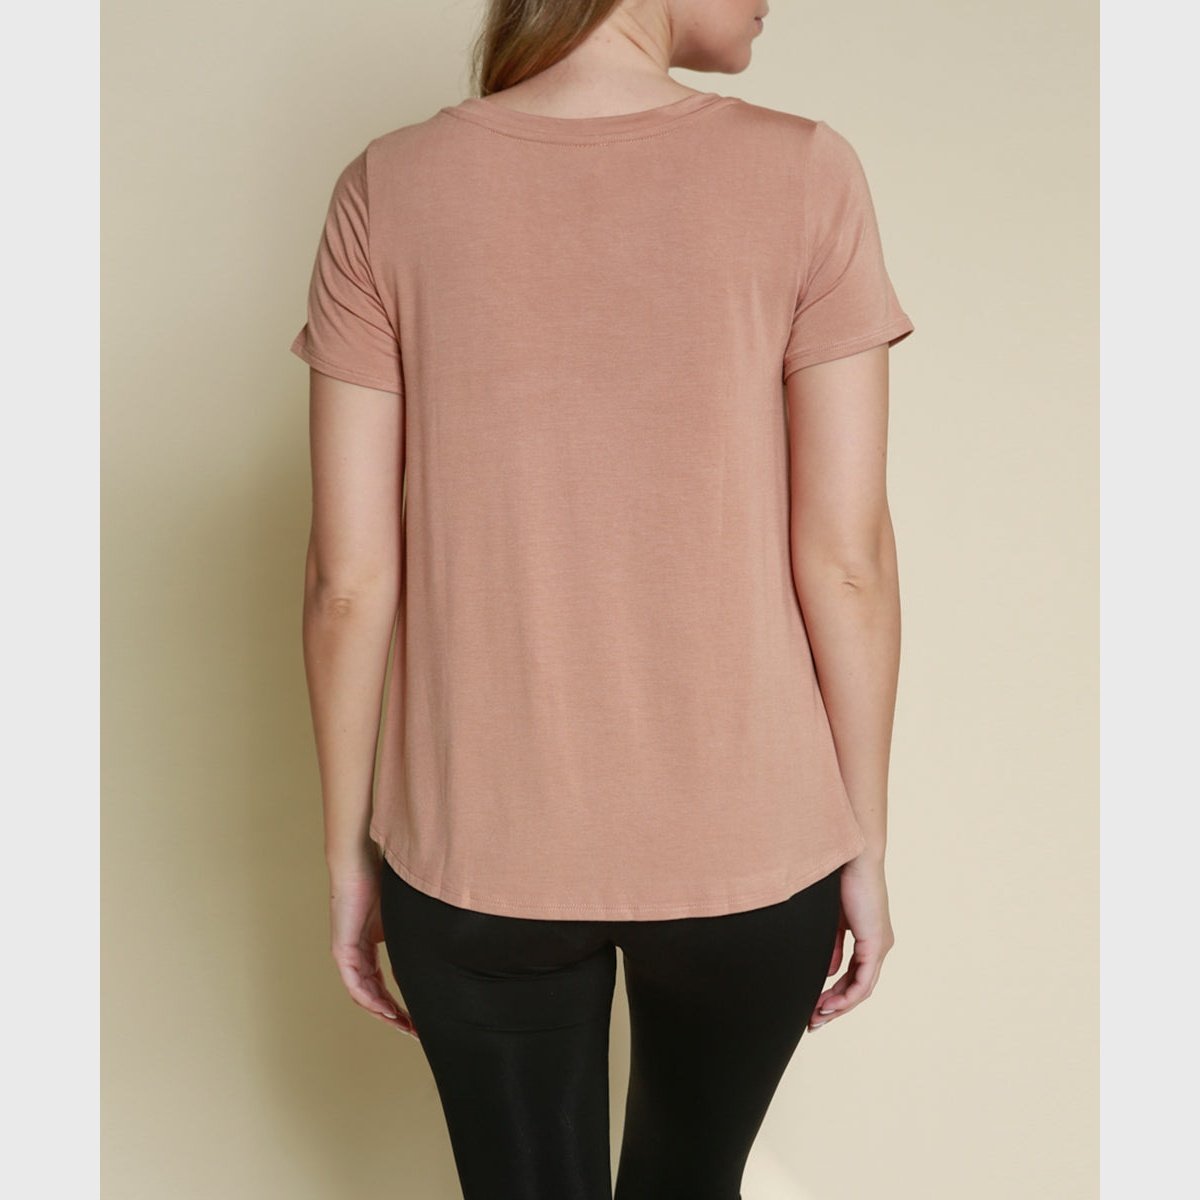 Bamboo Relaxed Fit Classic Top